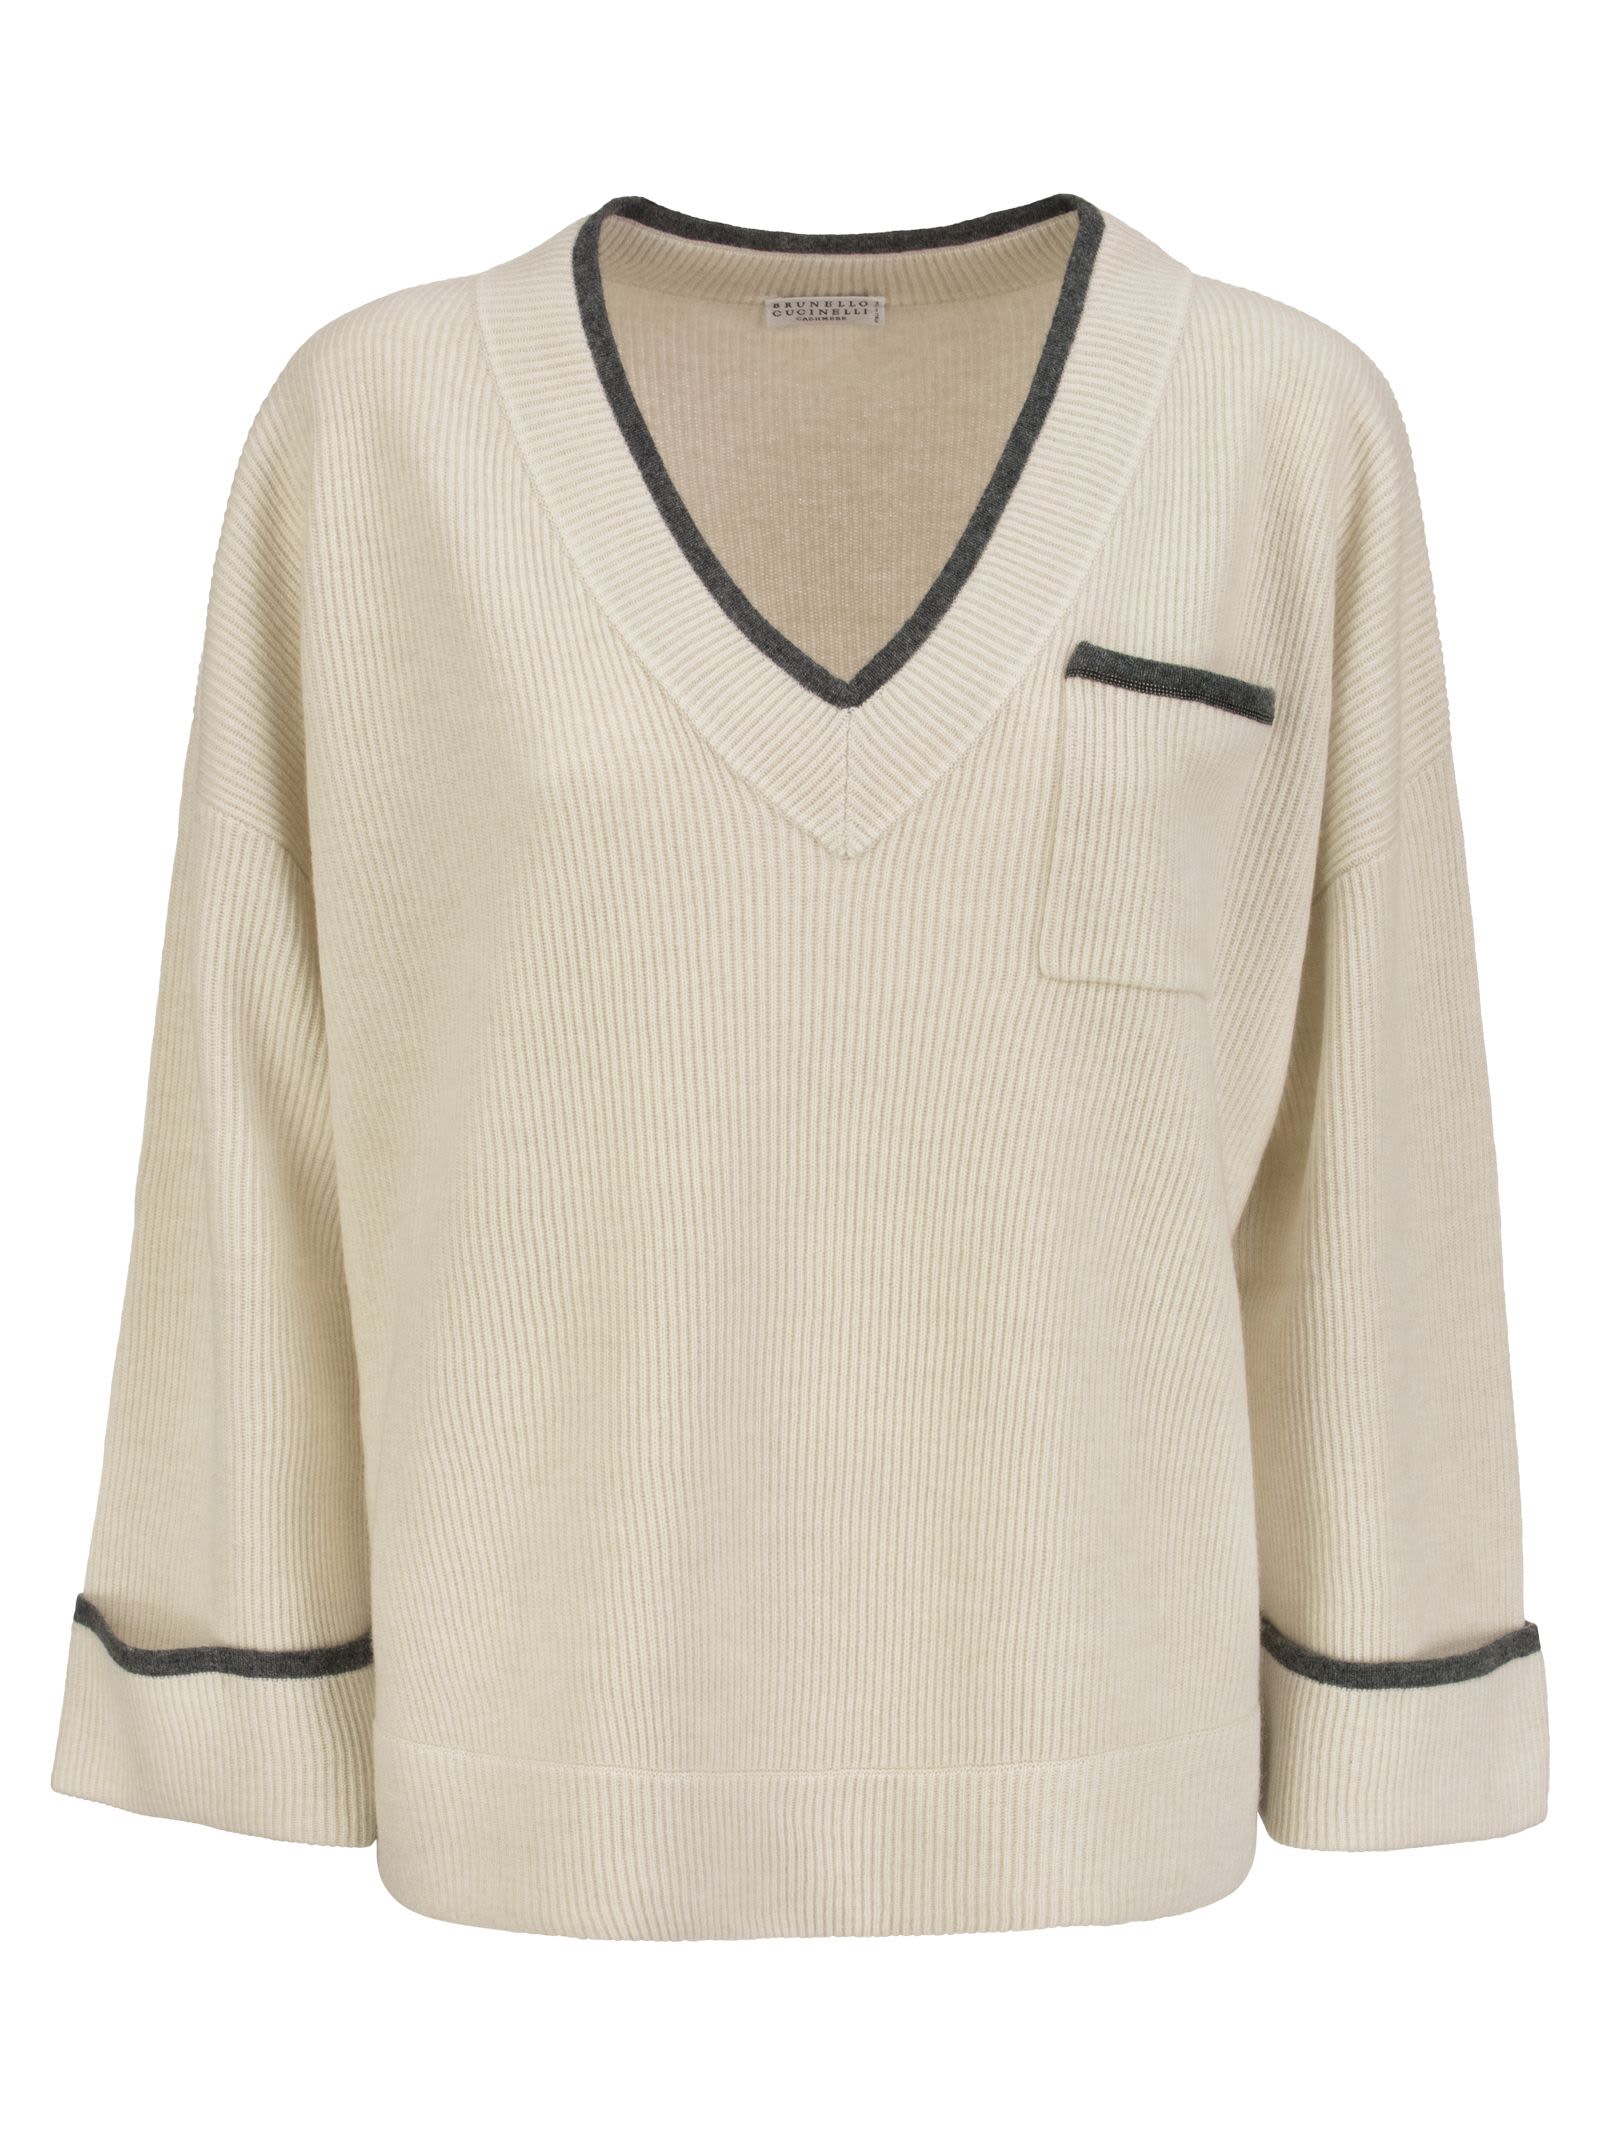 Brunello Cucinelli English Rib Cashmere Sweater With Contrasting Edging And shiny Pocket